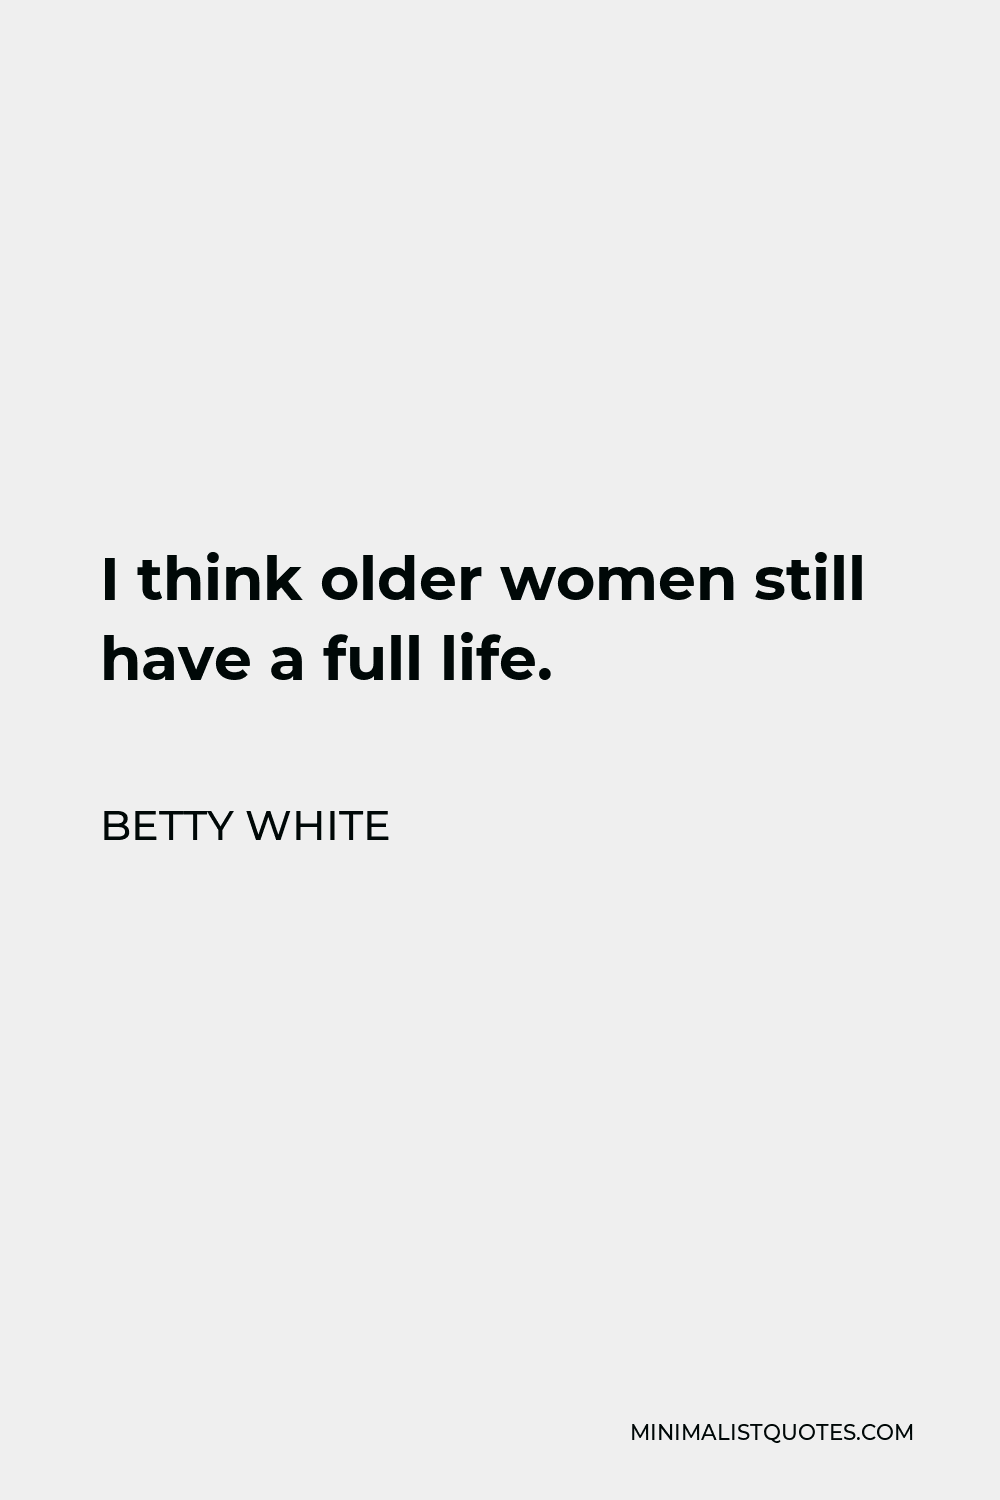 Betty White Quote - I think older women still have a full life.